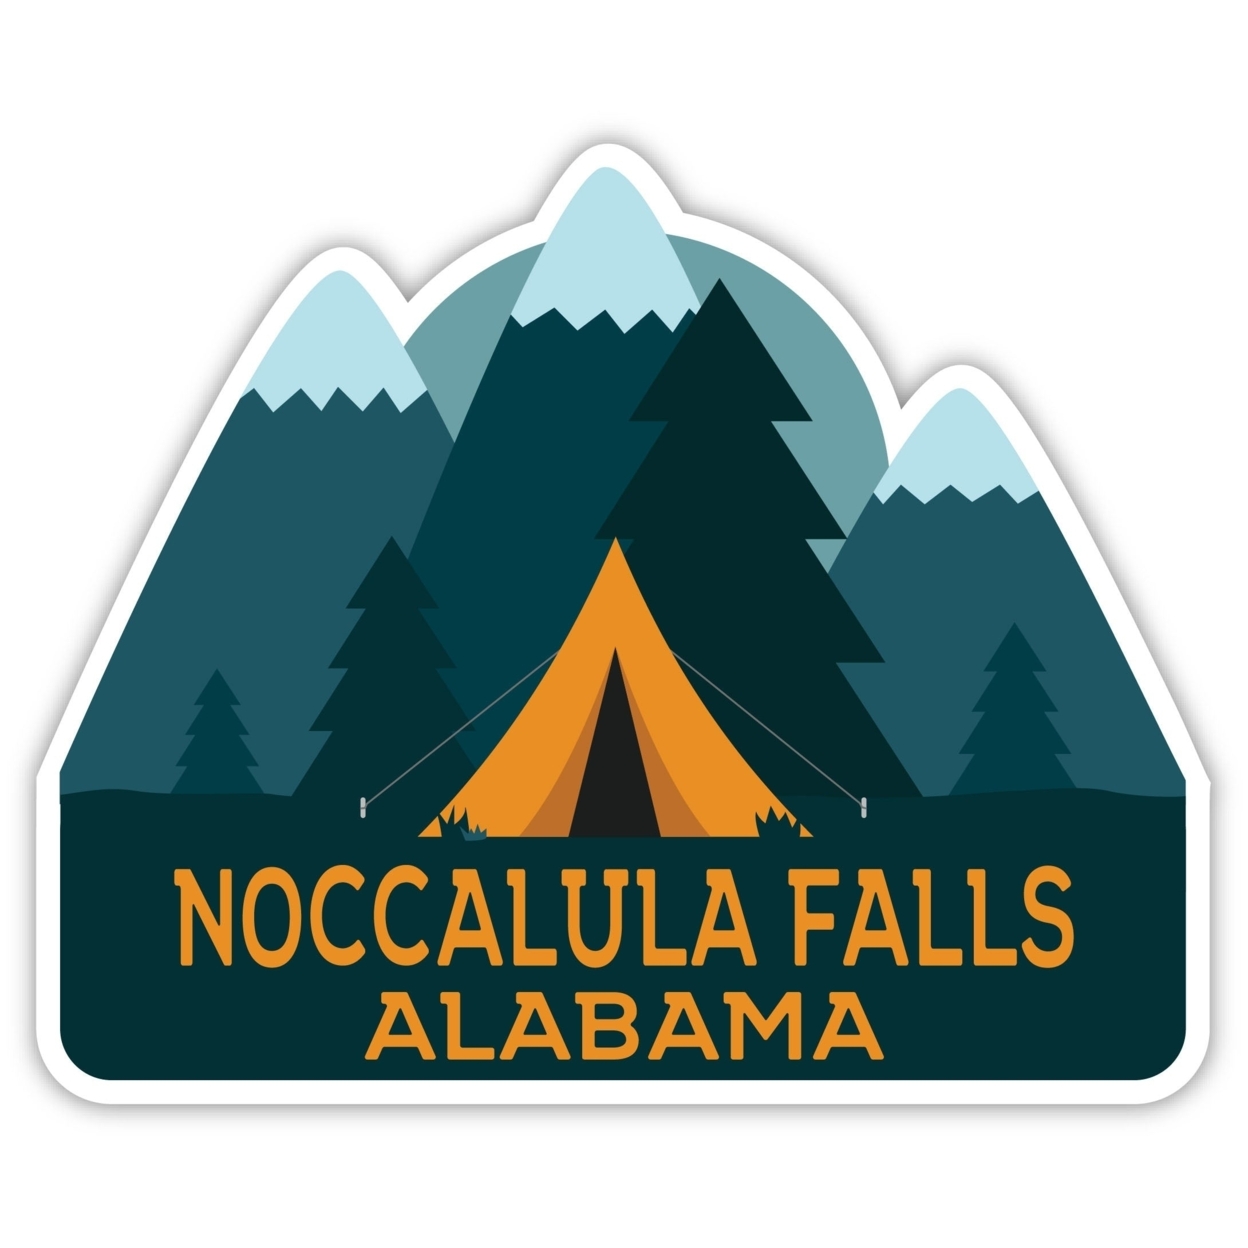 Noccalula Falls Alabama Souvenir Decorative Stickers (Choose Theme And Size) - Single Unit, 2-Inch, Great Outdoors